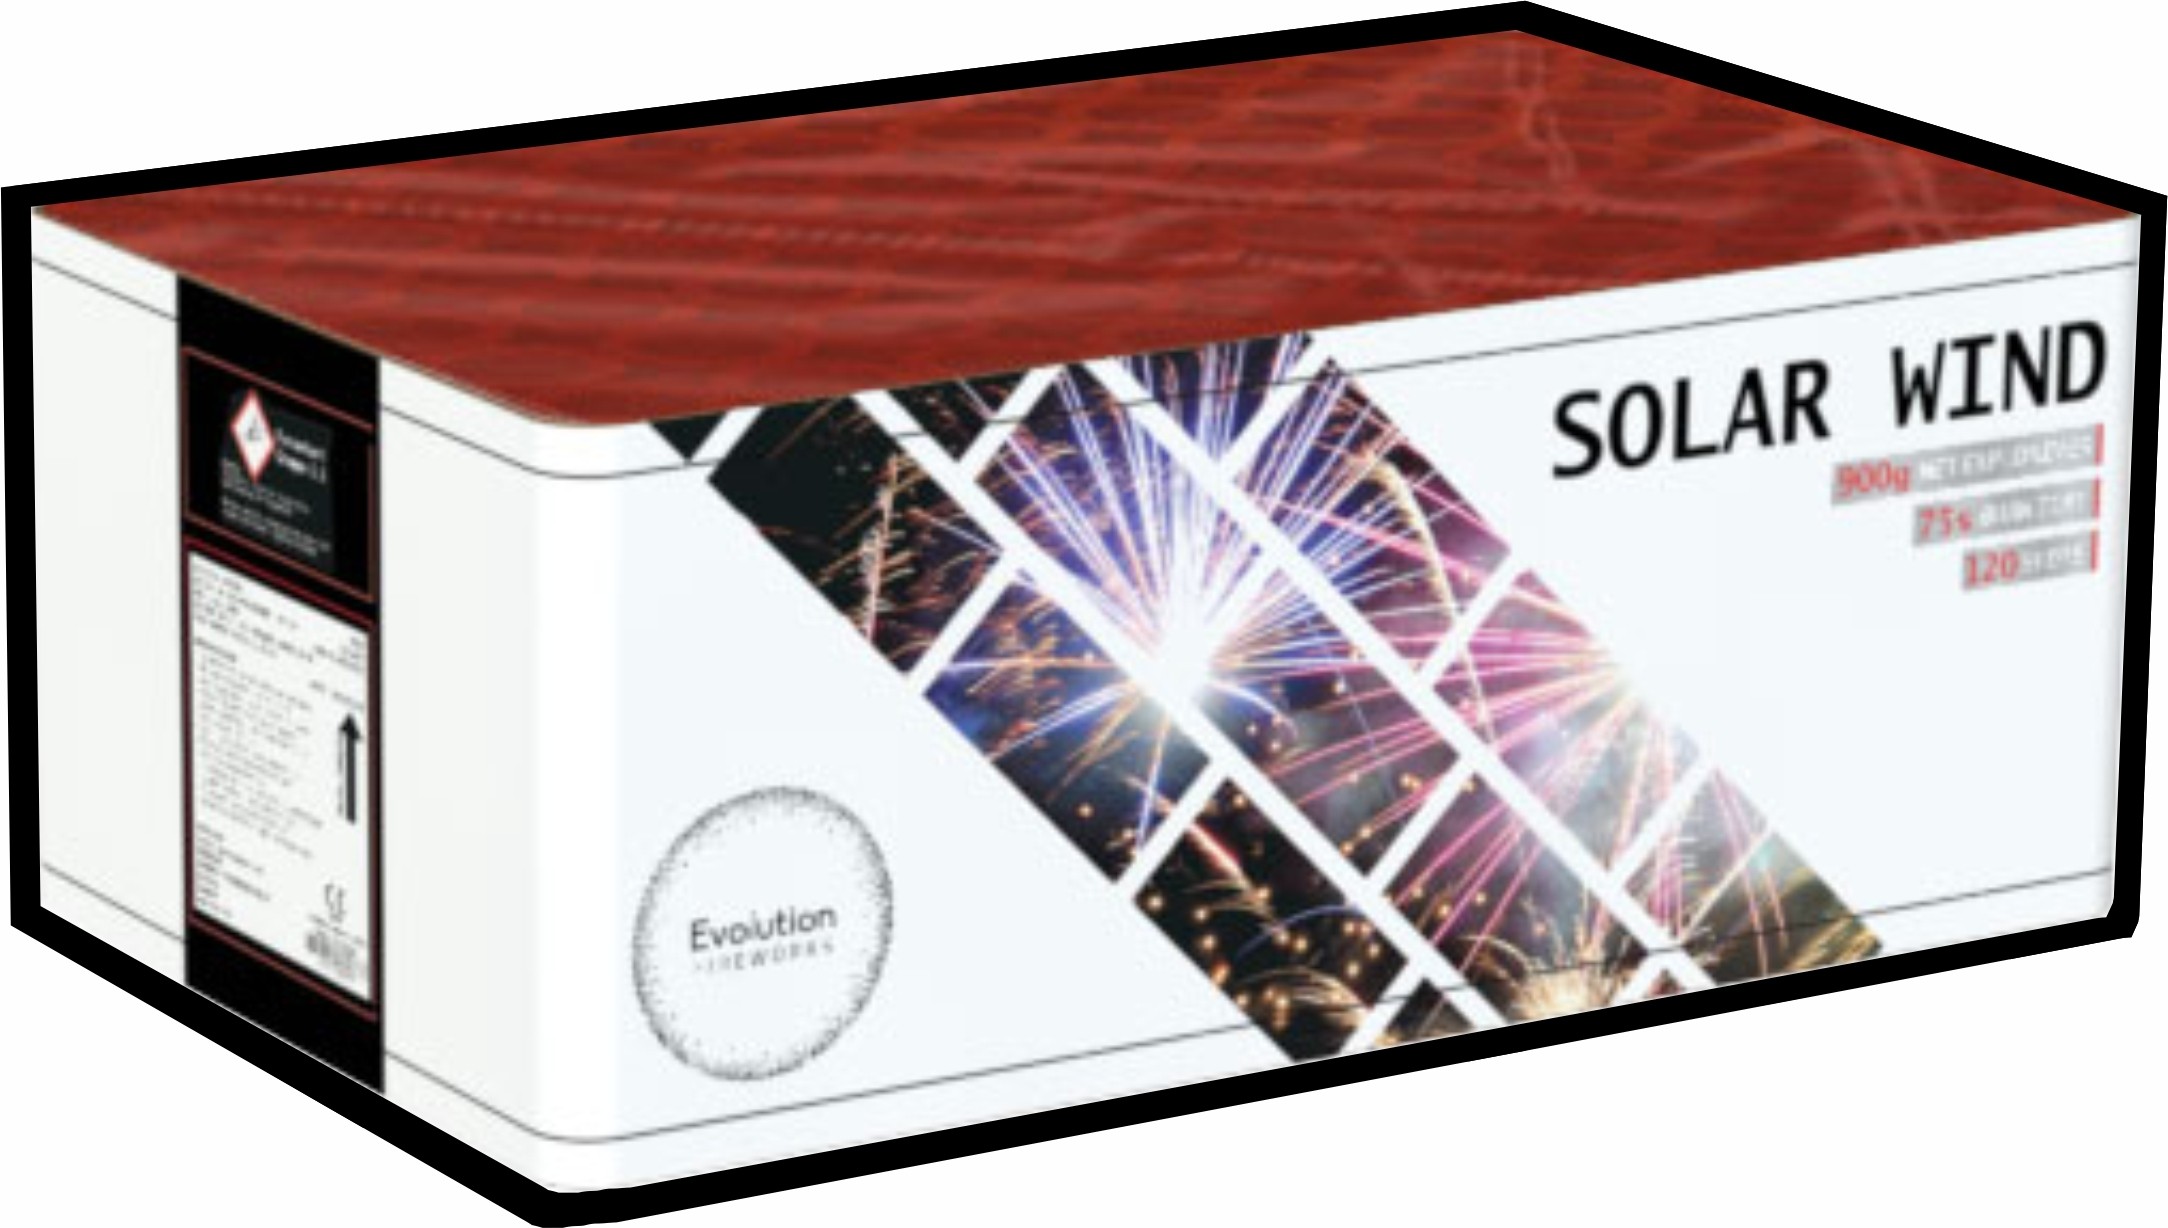 Solar Wind available at Fireworks Kingdom